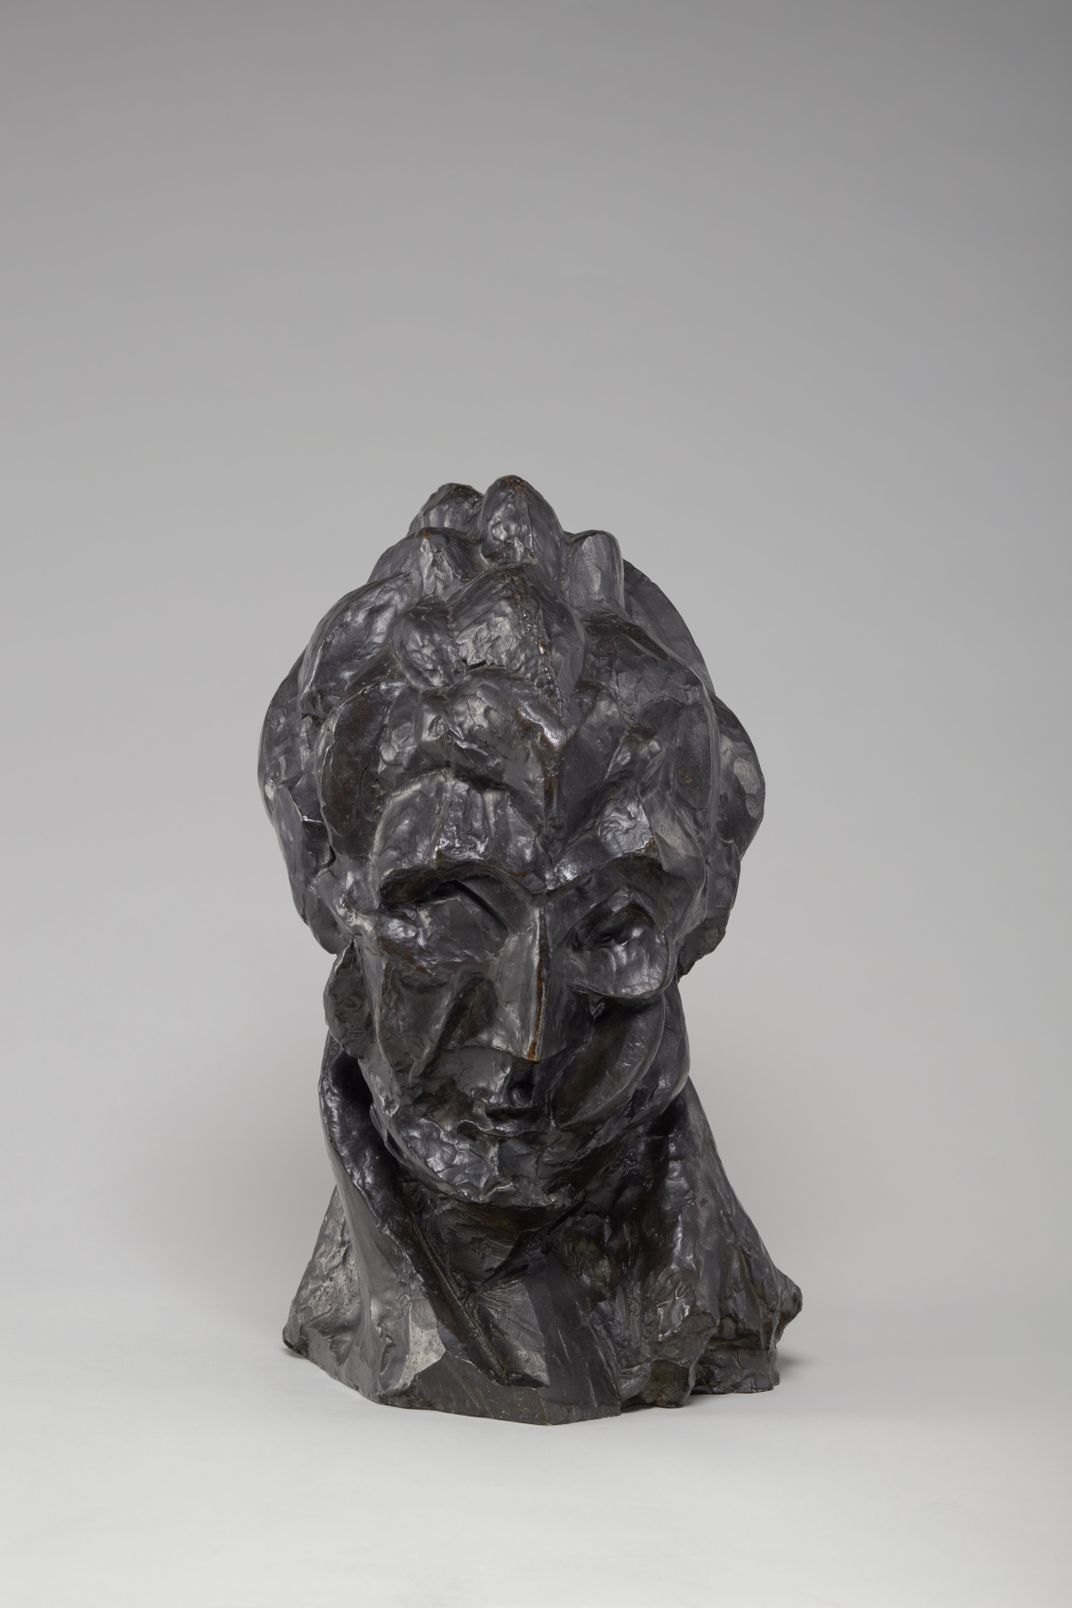 Explore a Century of Masterpieces, From Rodin to Picasso, Brought Together by One Passionate Collector